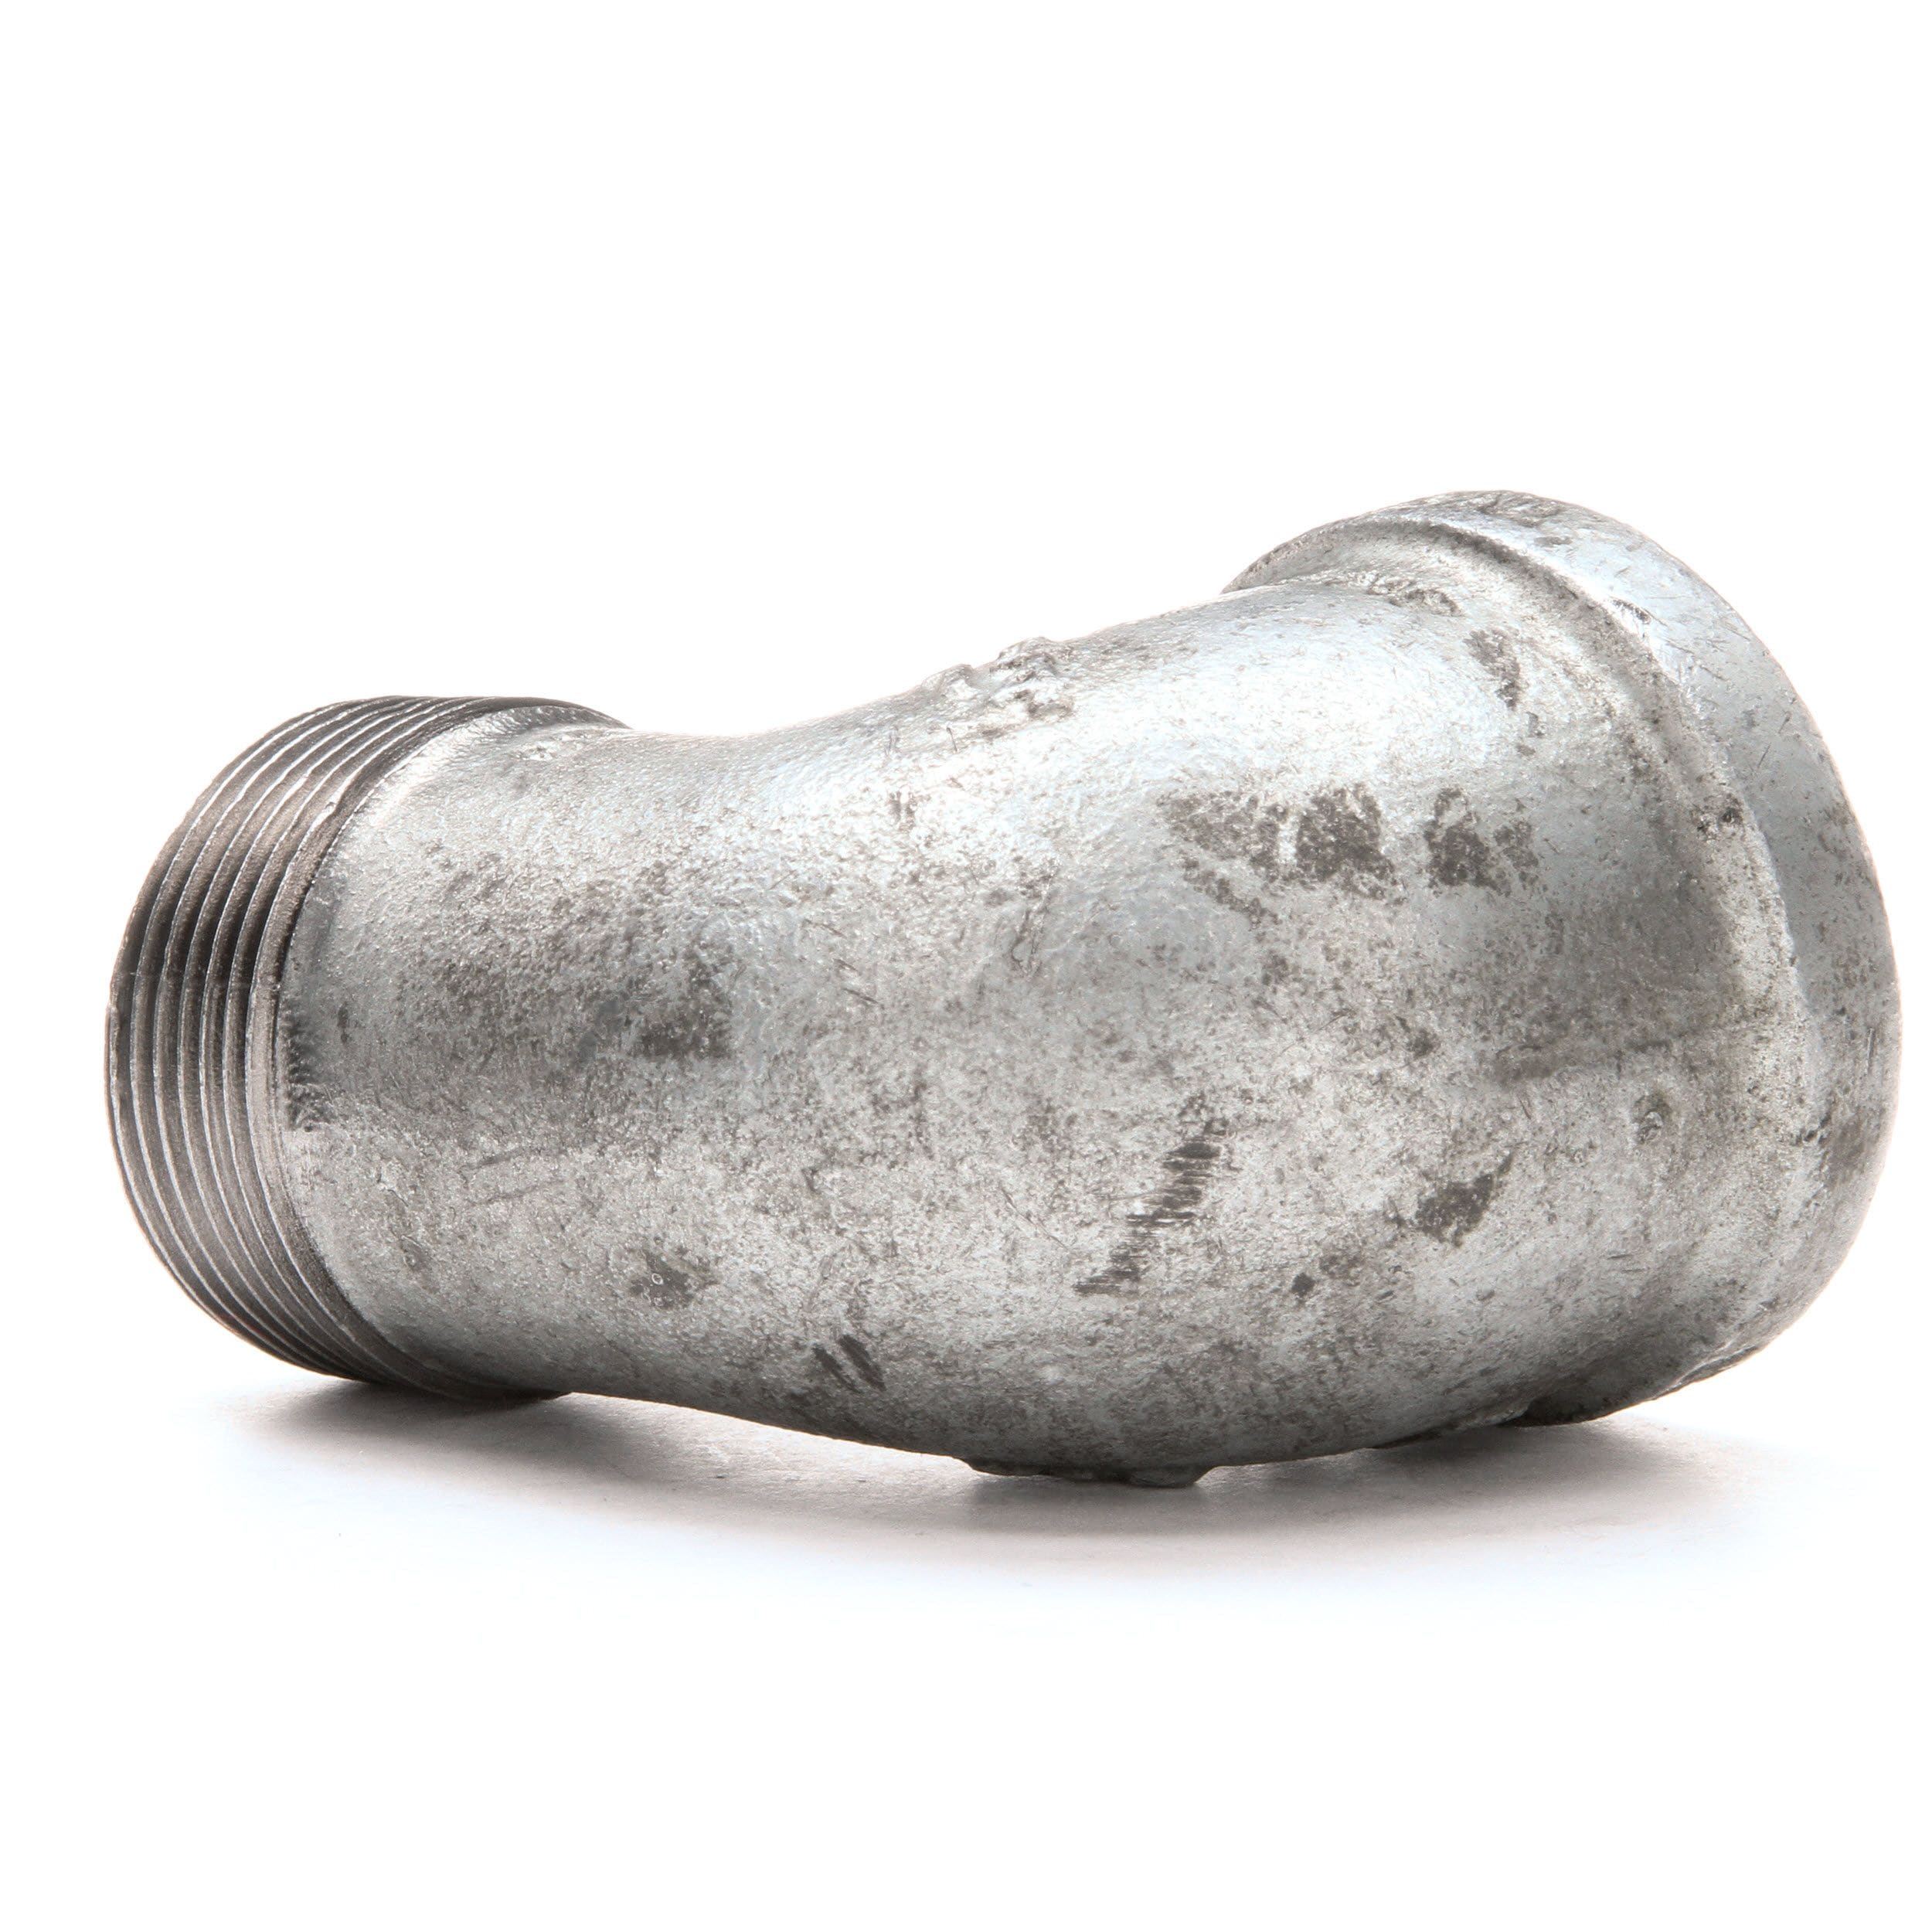 1 1/4" Galvanised Malleable Iron Elbow 90 Degree Pipe Fitting 32mm